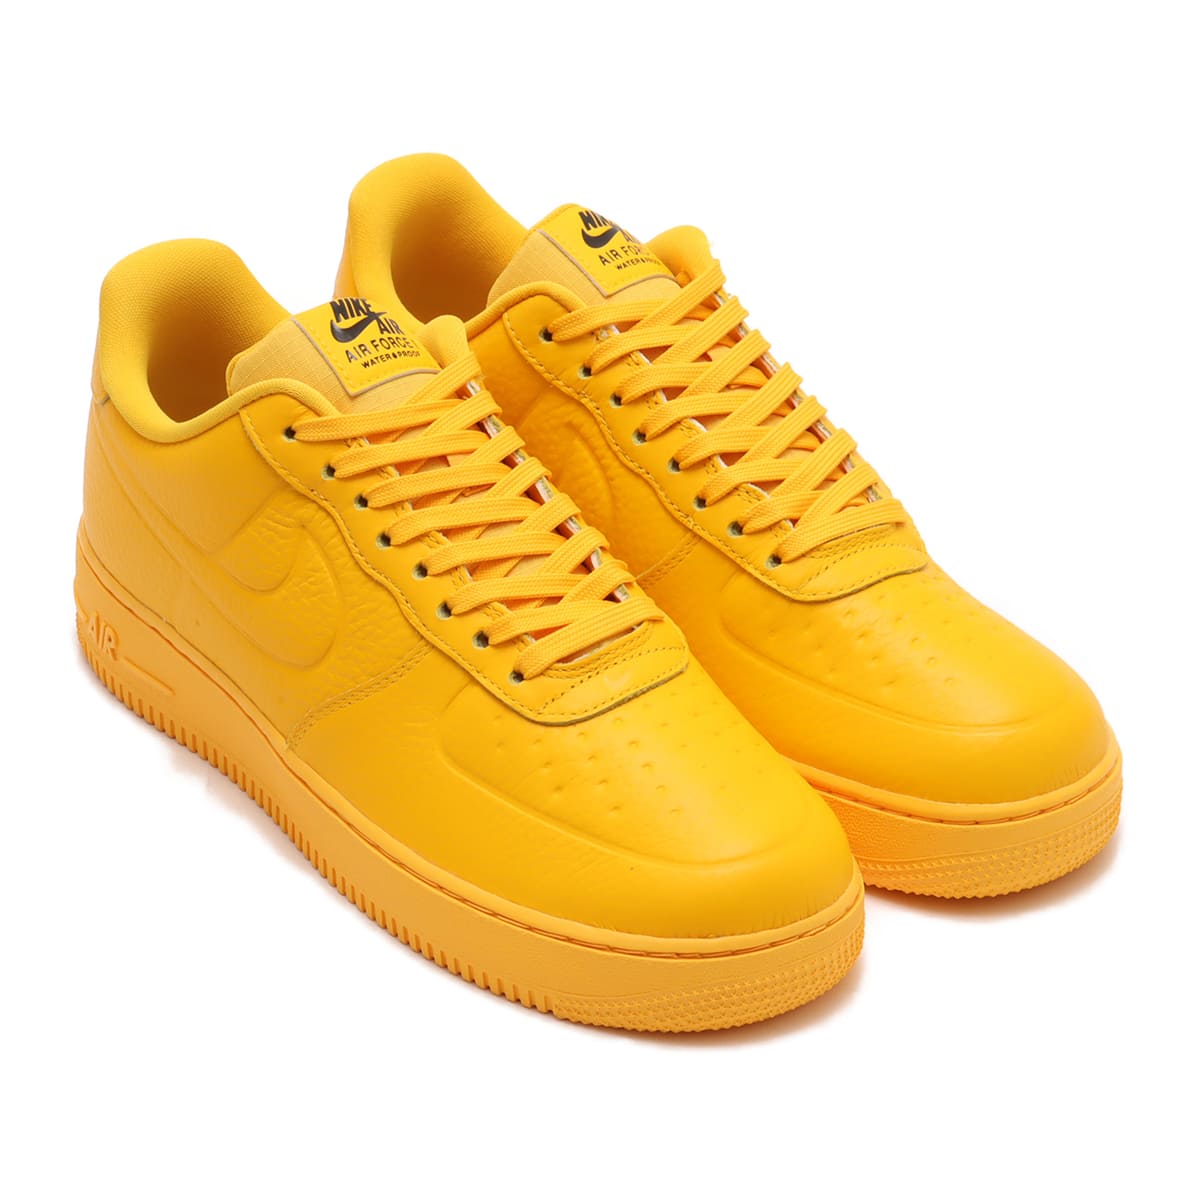 Nike Air Force 1 '07 Pro-Tech WP 25cm /7予めご了承下さい